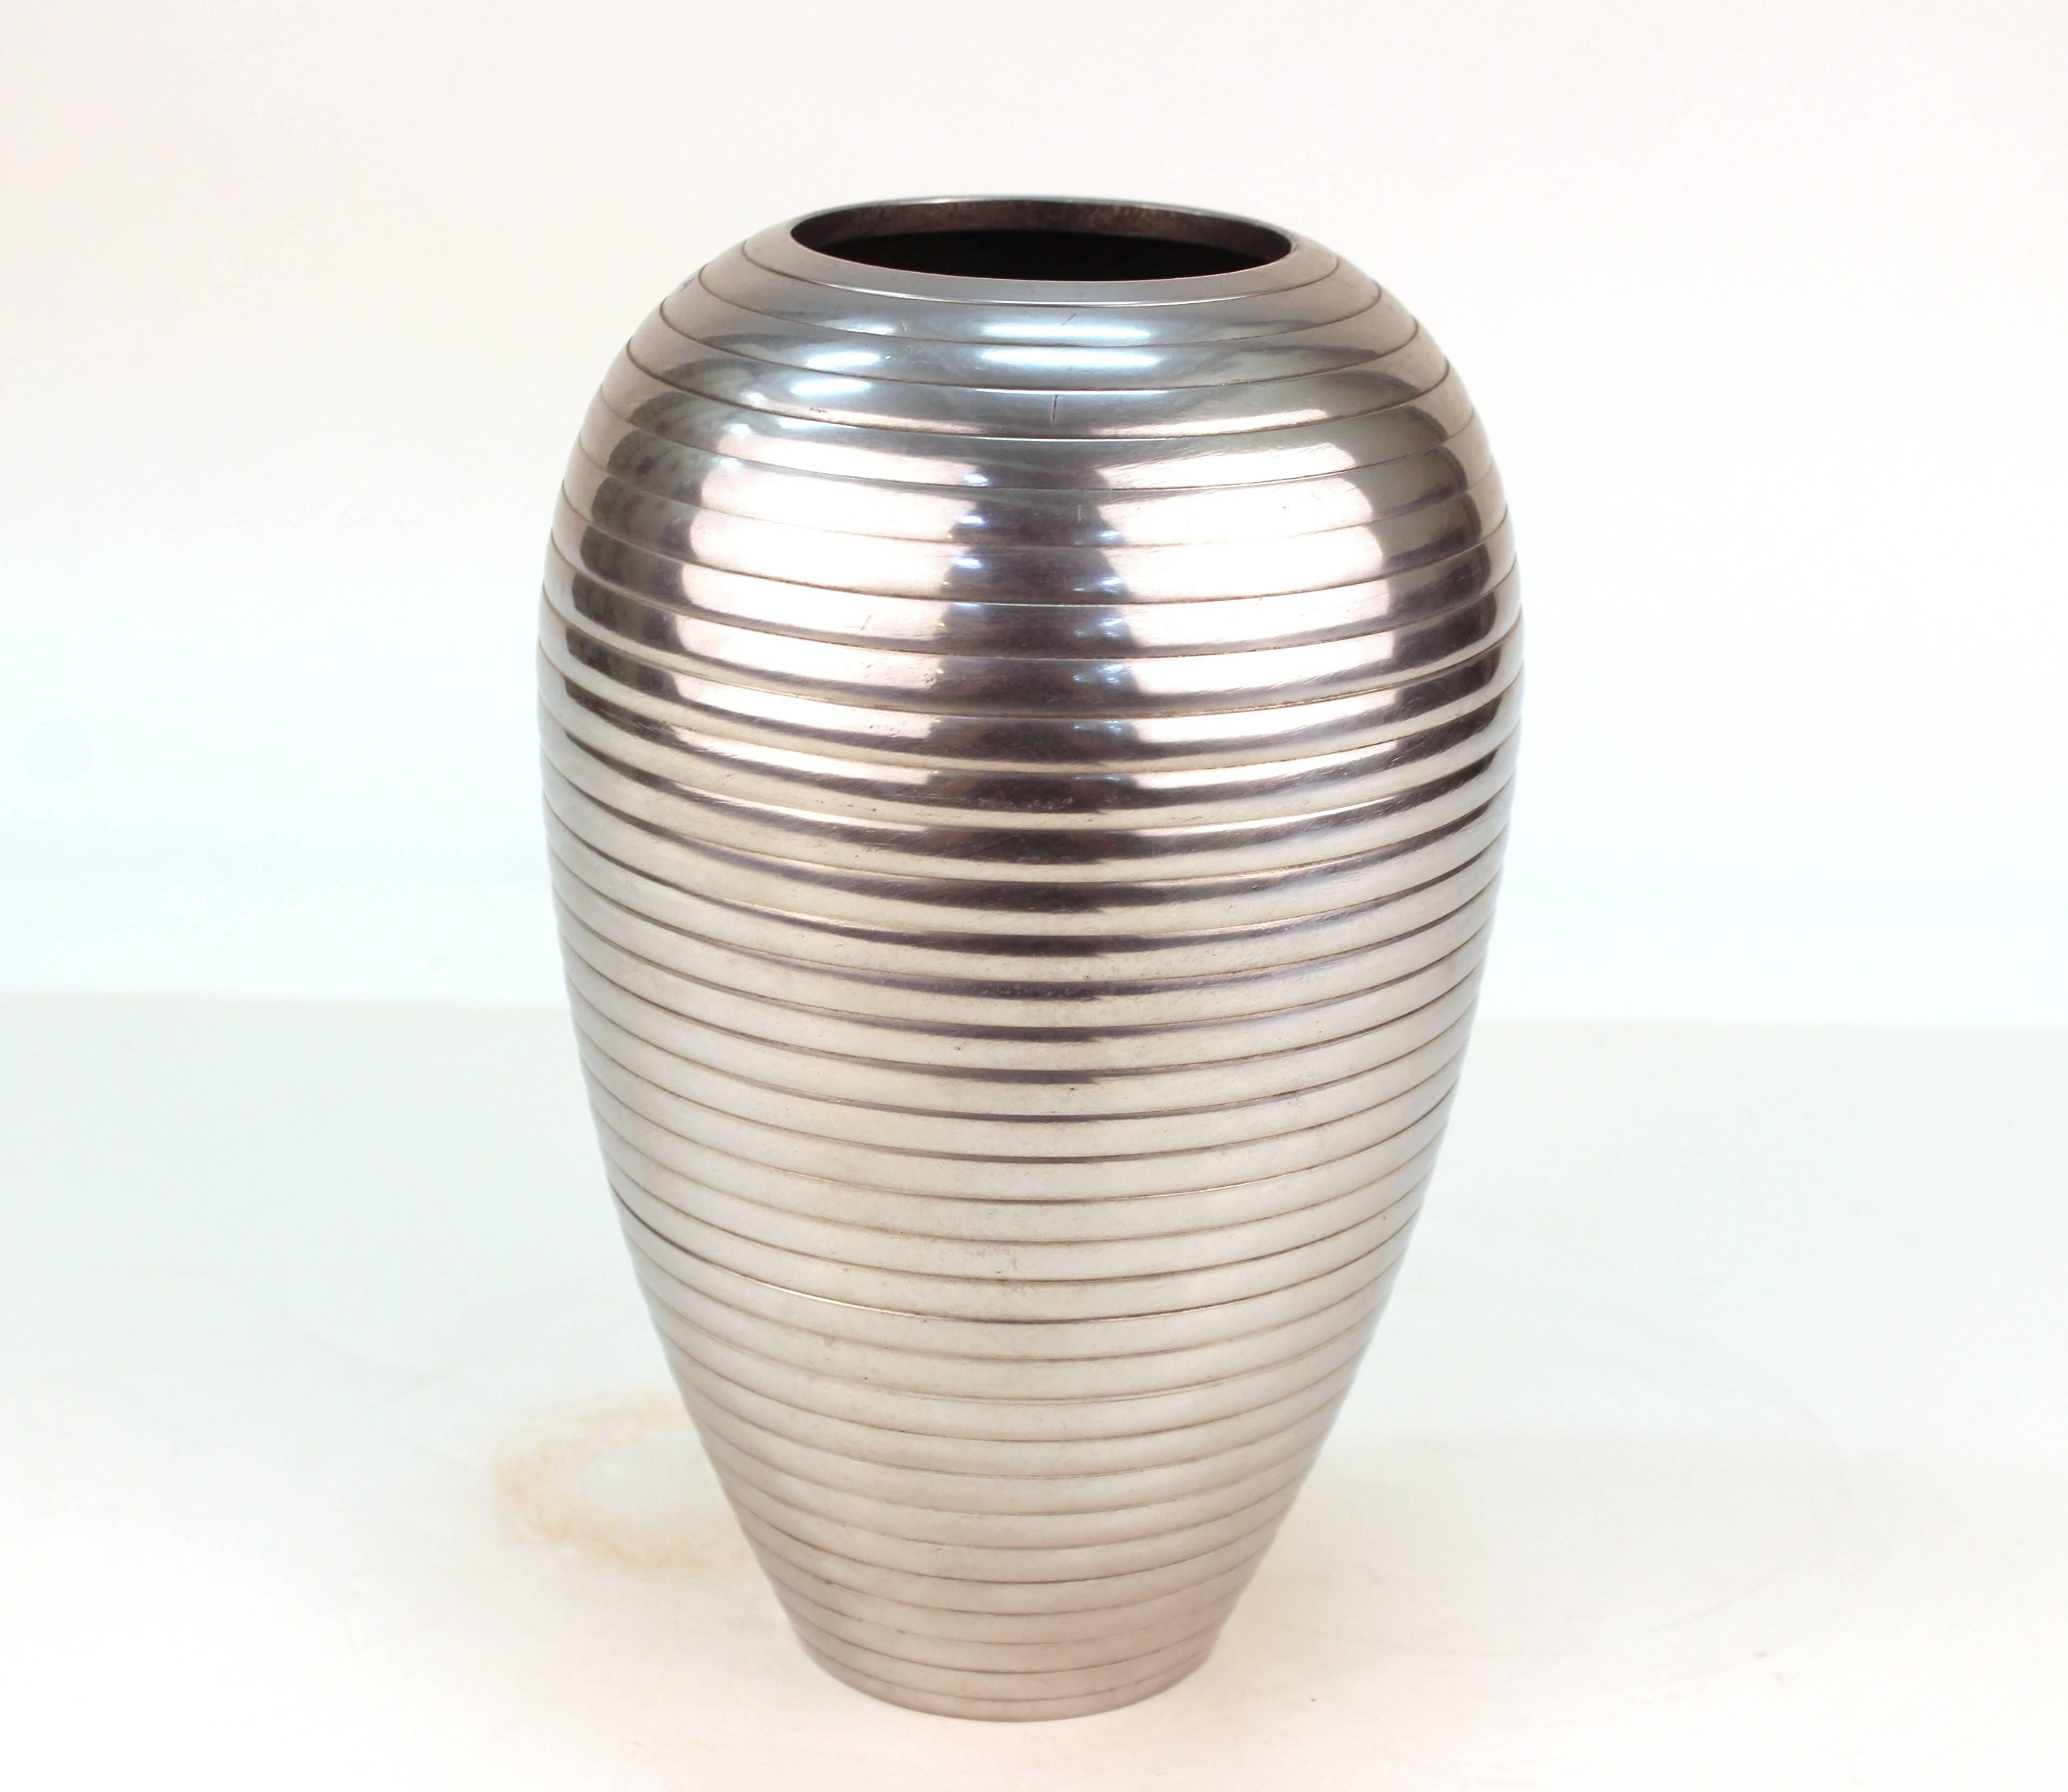 Art Deco style polished metal vase with a ribbed exterior. The piece has a few minor scratches on the bottom and is in good vintage condition.